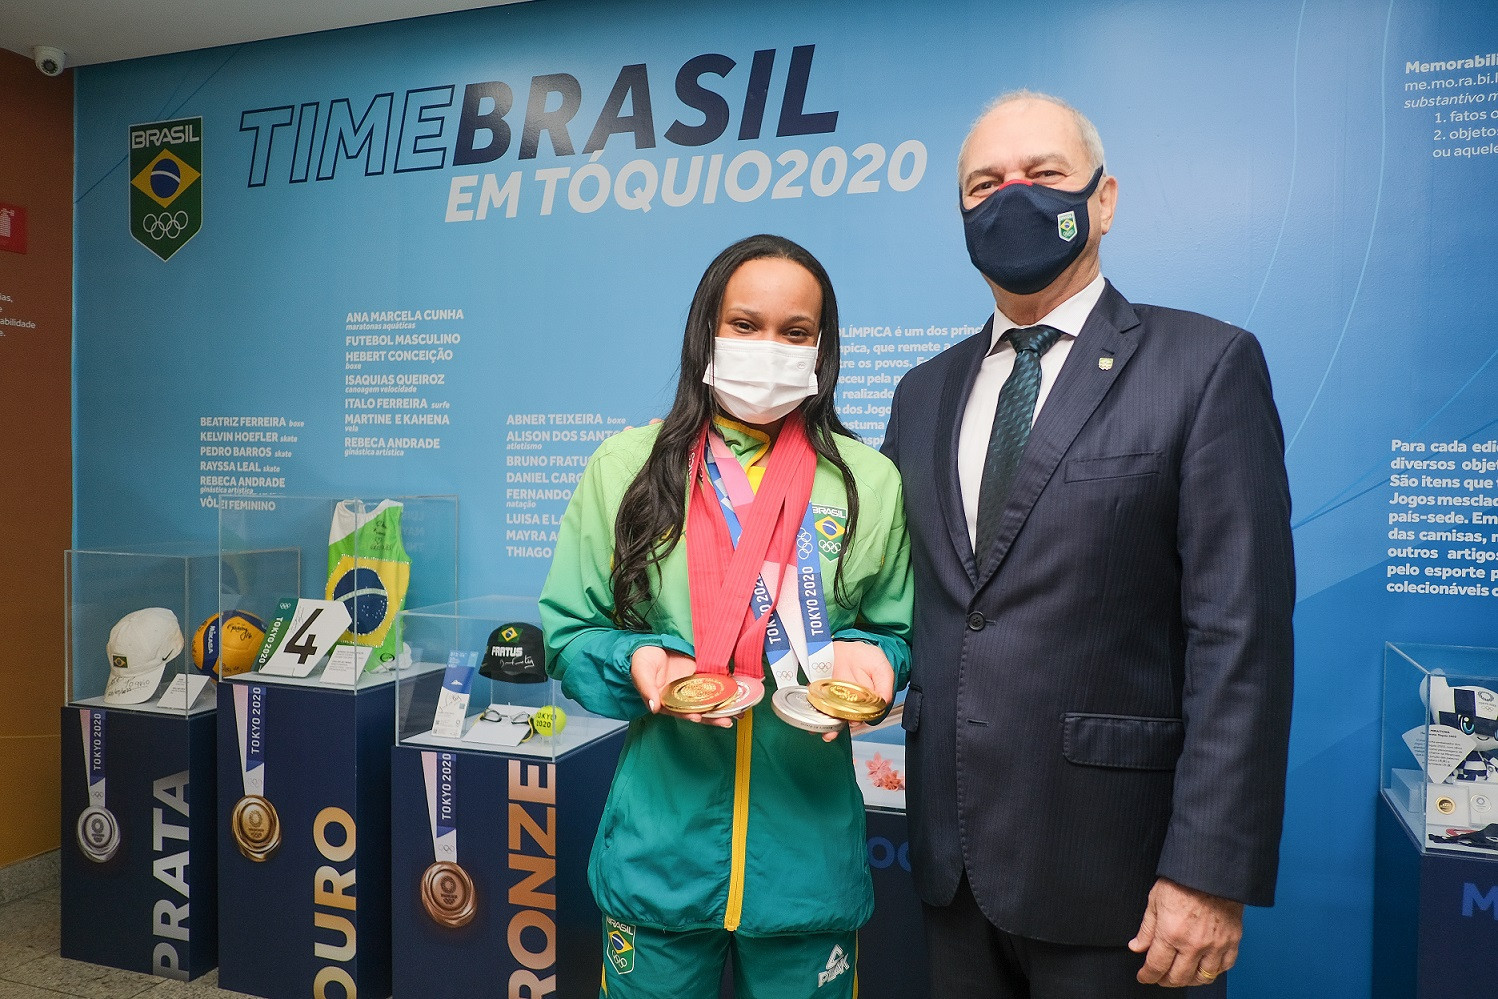 Andrade’s kit and Leal’s cap among items at Brazilian NOC Tokyo 2020 exhibition